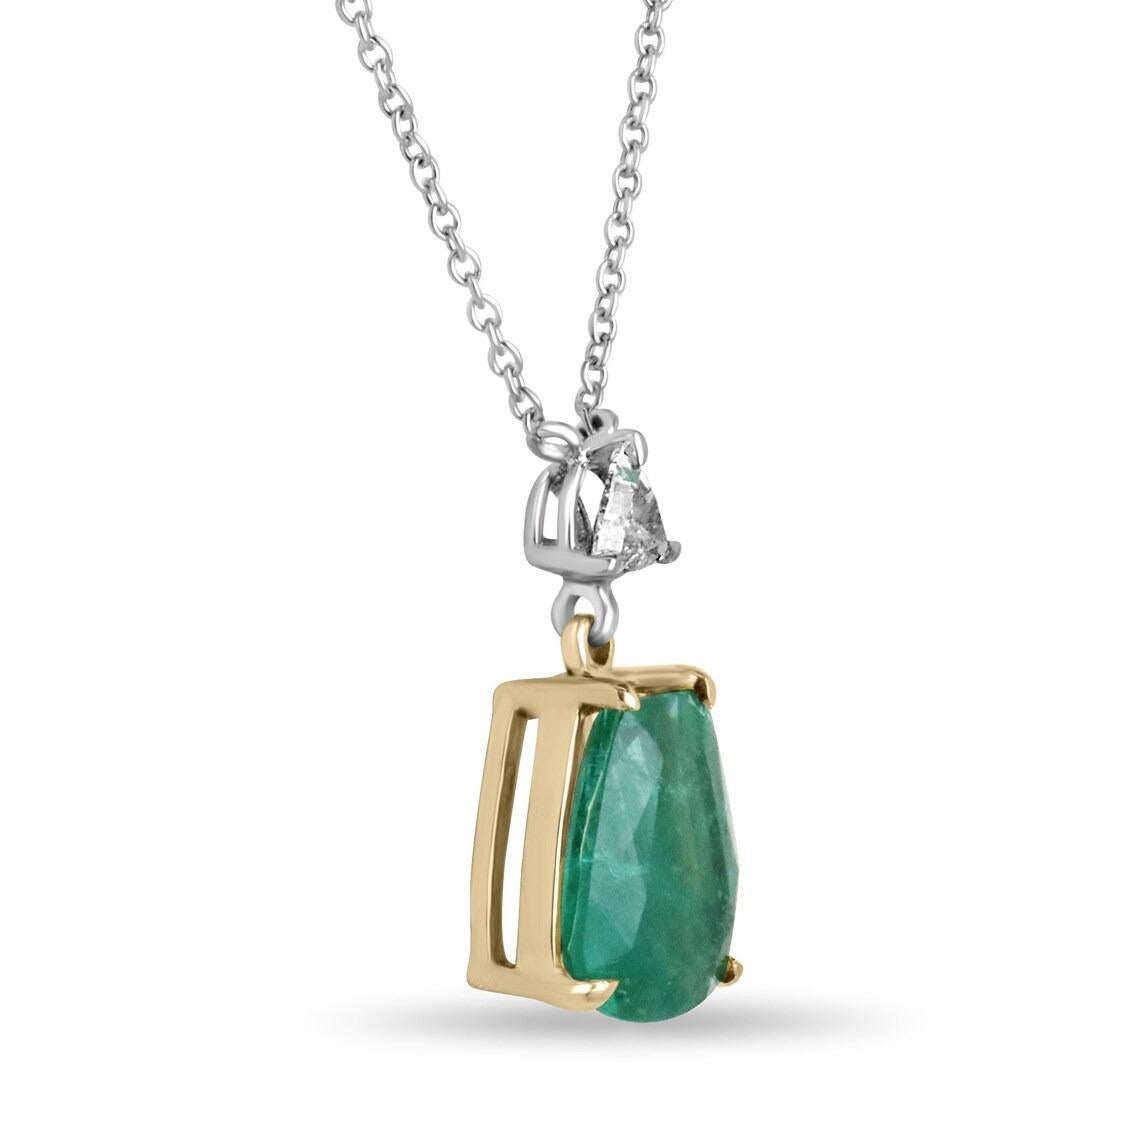 A magnificent and one-of-a-kind piece, this is a natural emerald and diamond necklace that is sure to turn heads. It features a large irregular cut emerald that carries more than five carats, and showcases a remarkable lush dark green color with a